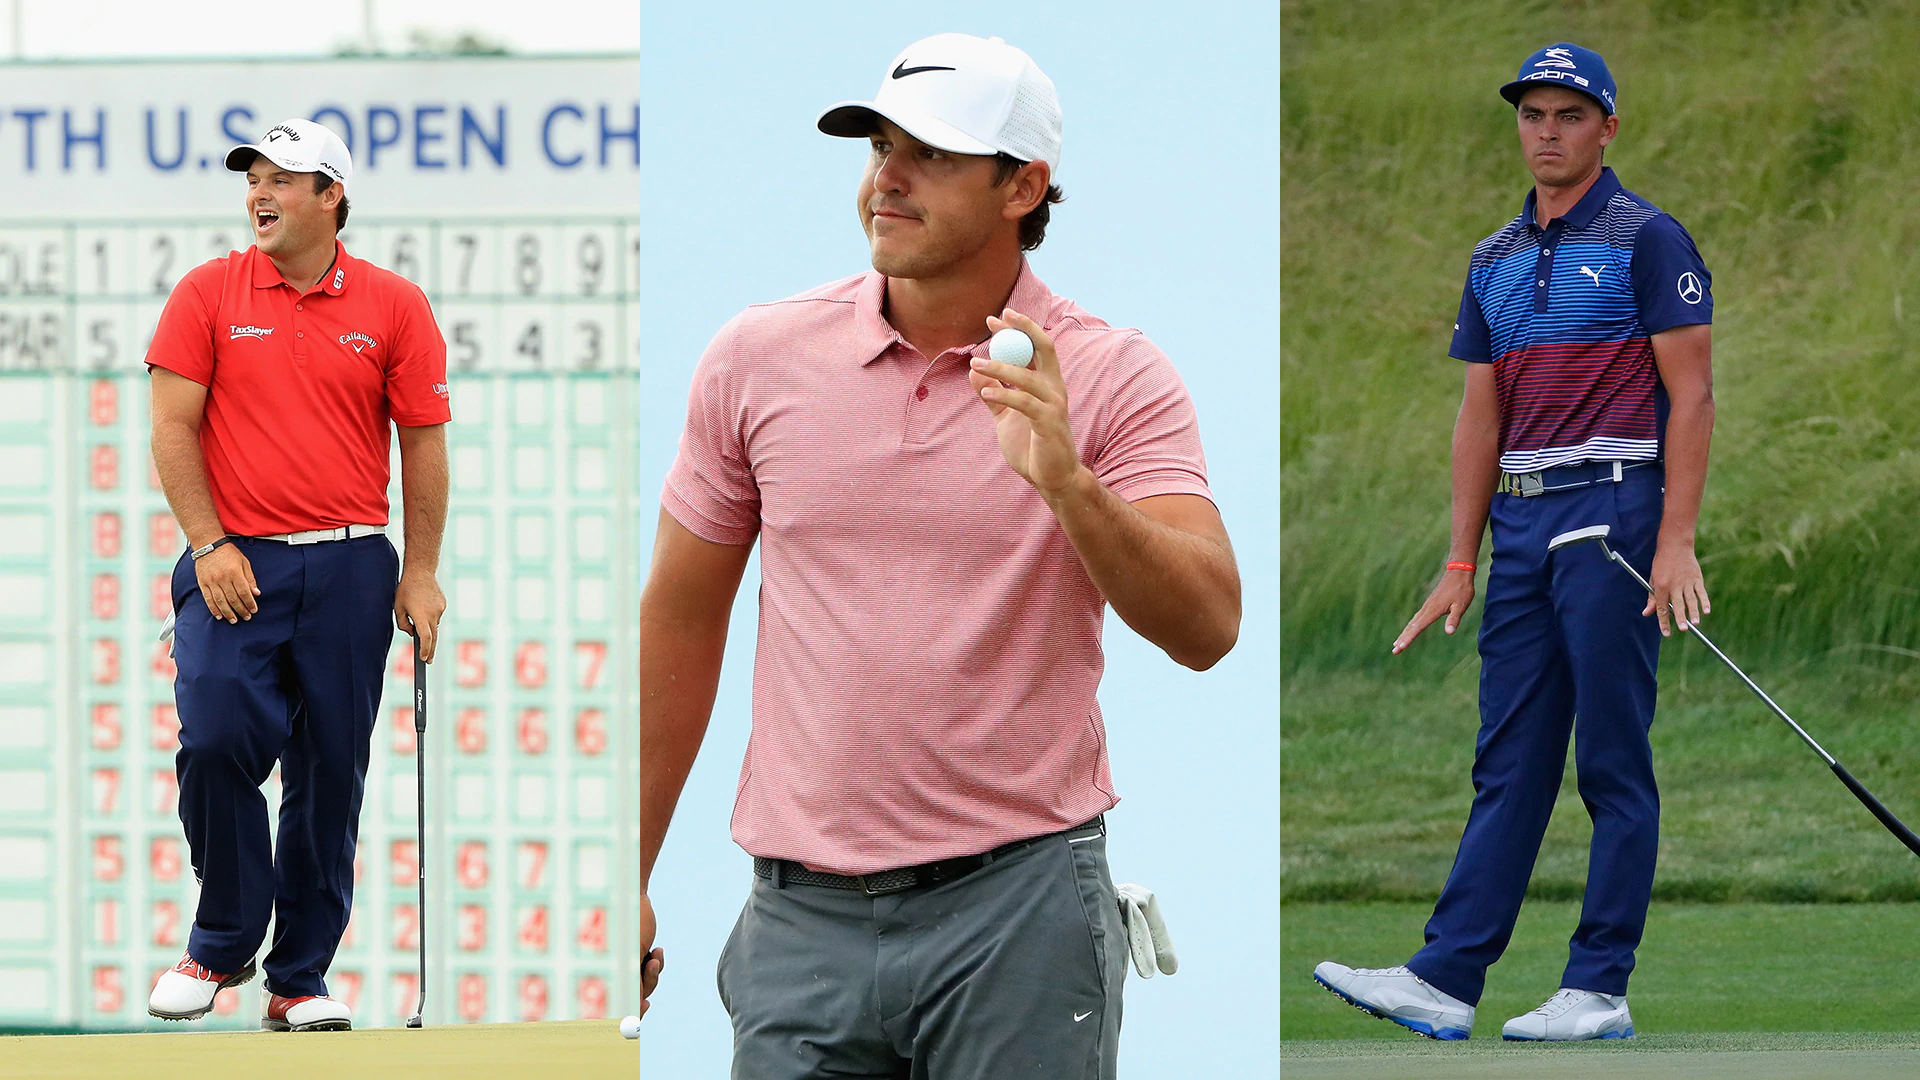 Punch Shot: Who will win the 117th U.S. Open?